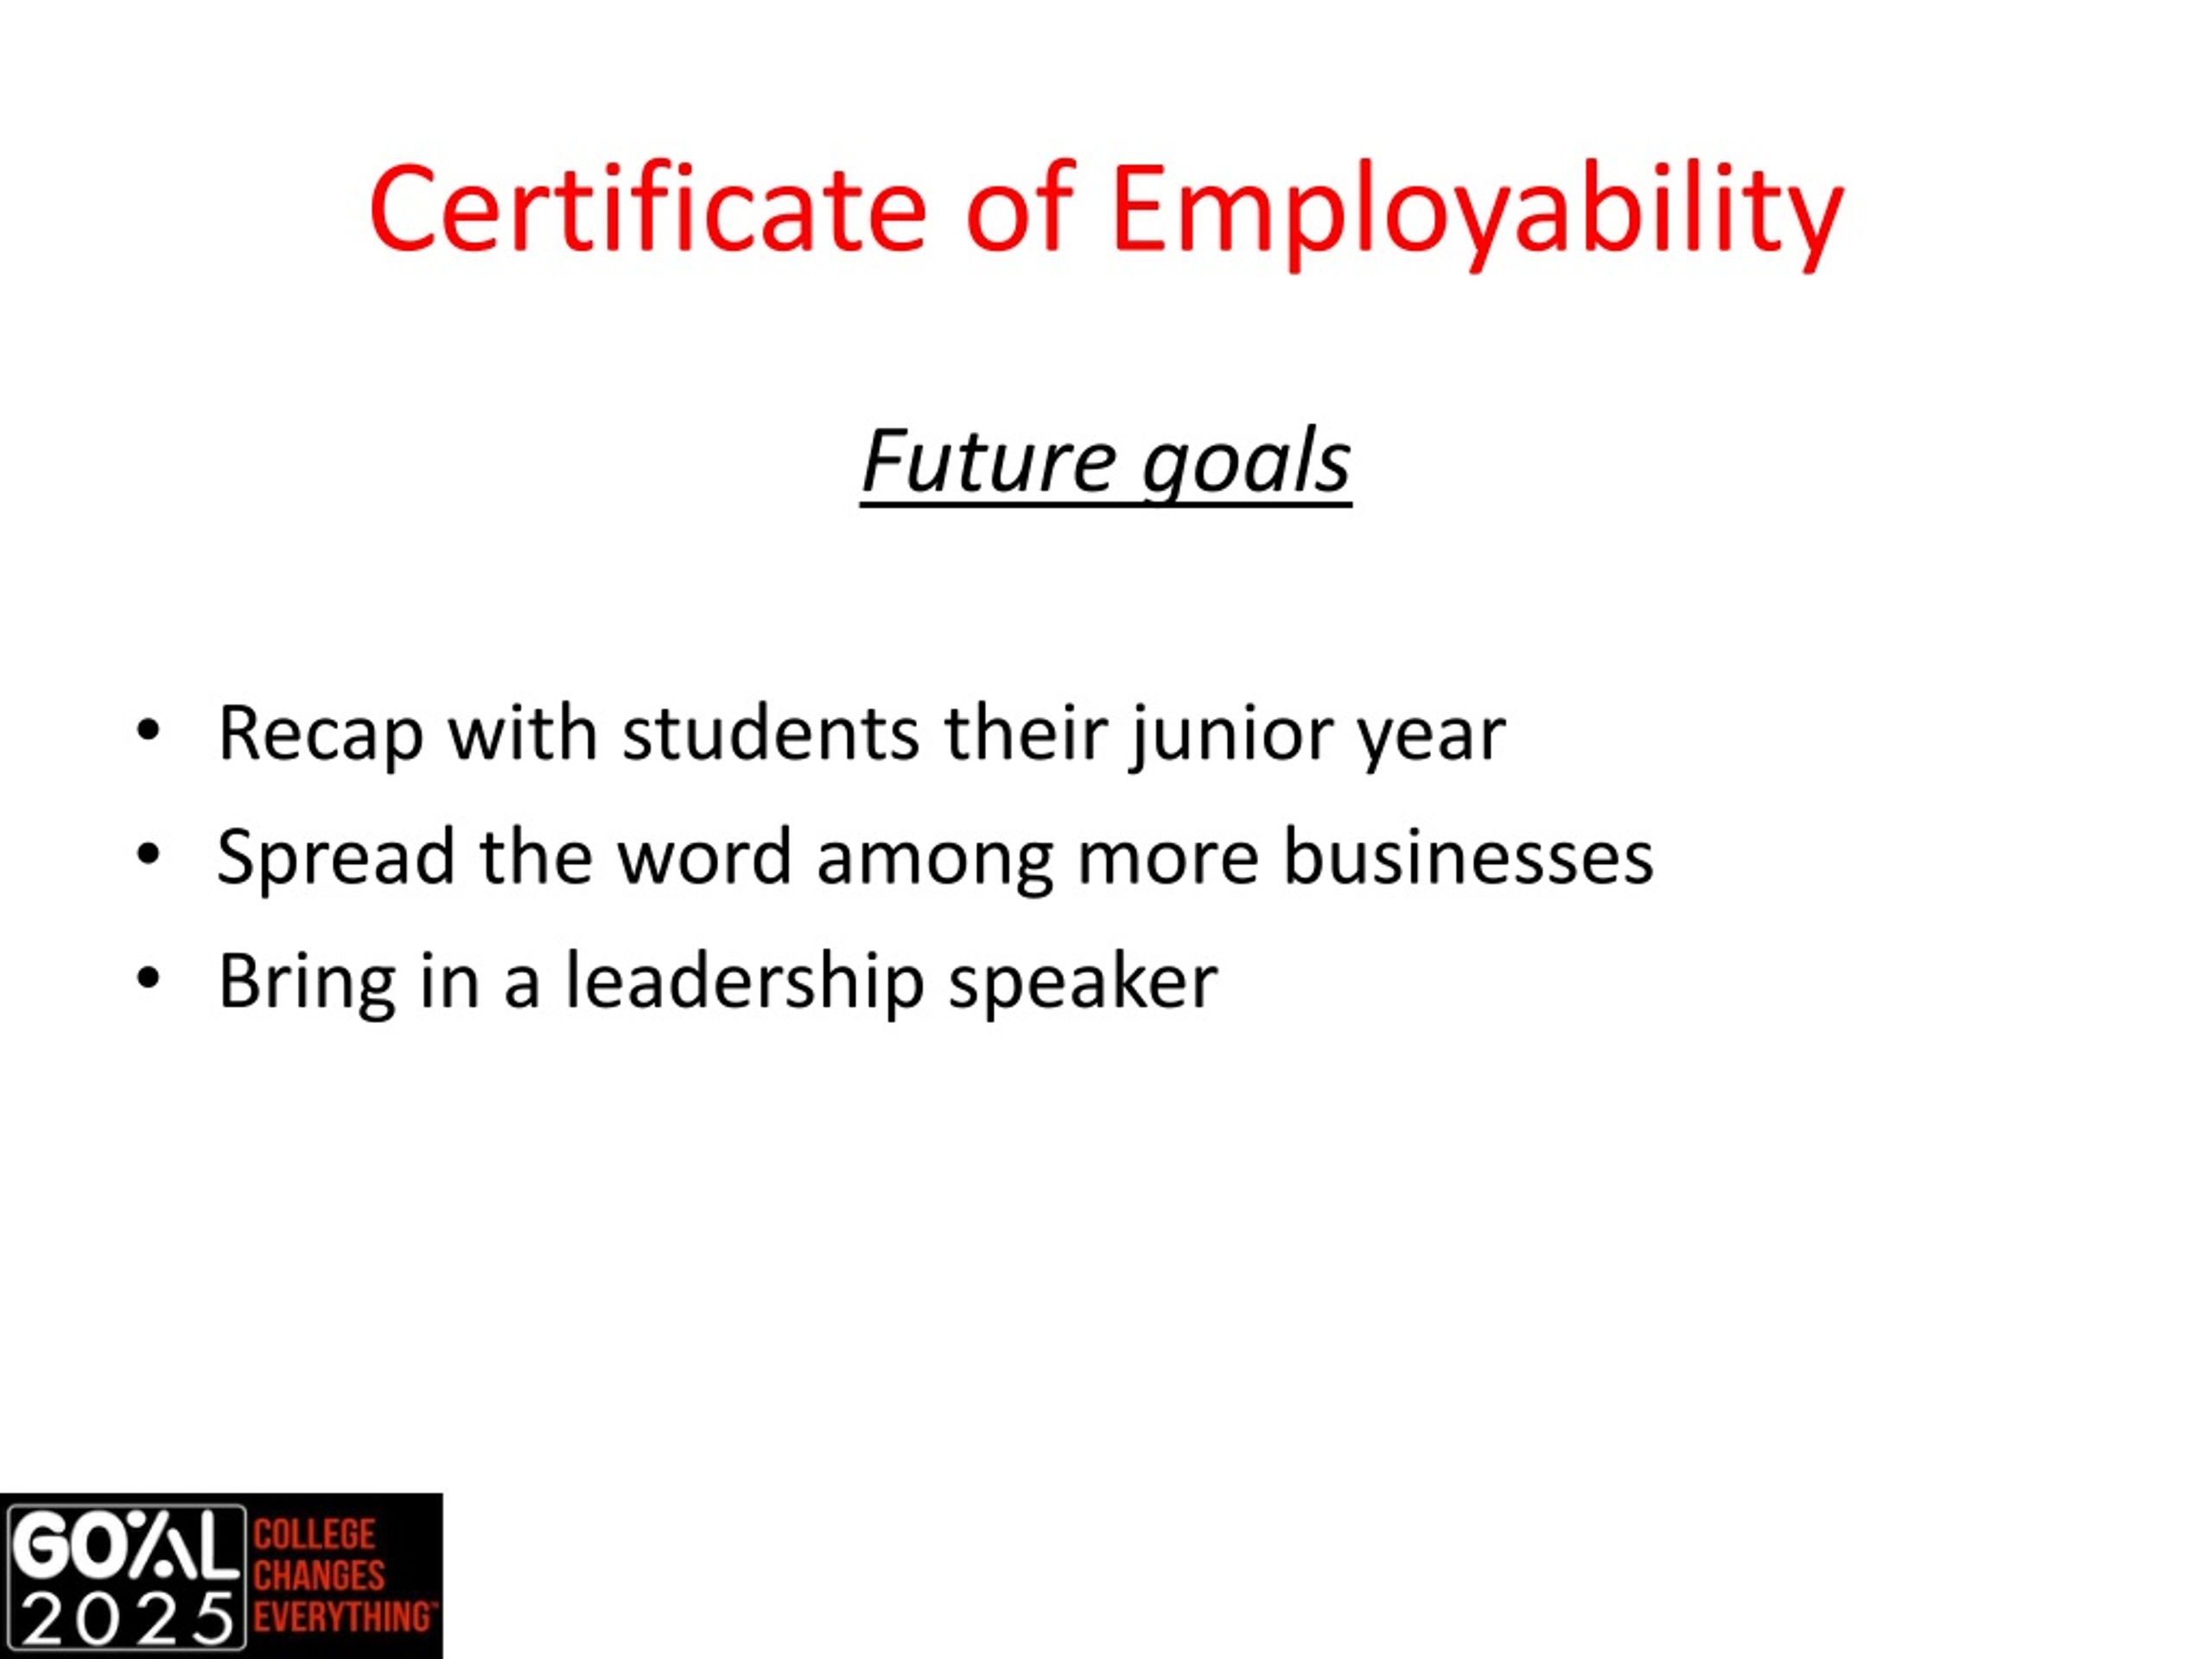 ppt-certificate-of-employability-powerpoint-presentation-free